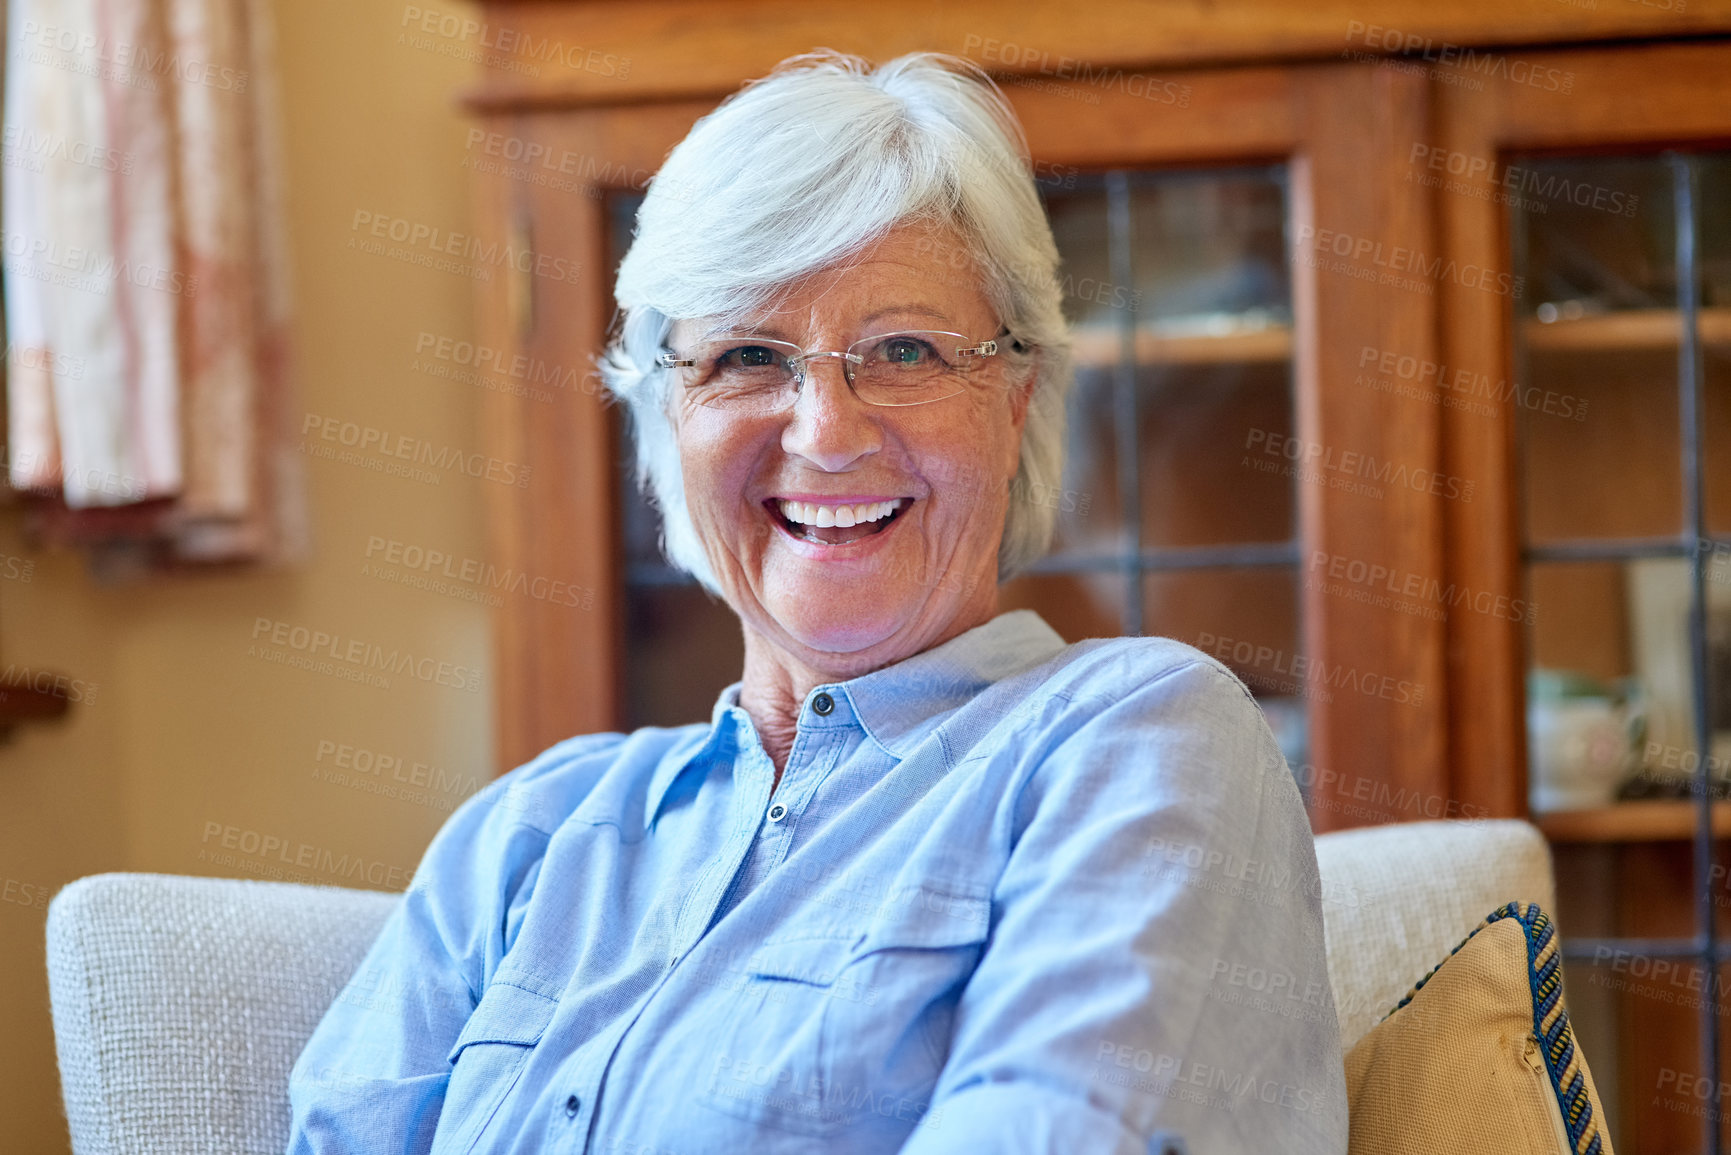 Buy stock photo Portrait of a senior woman relaxing at home